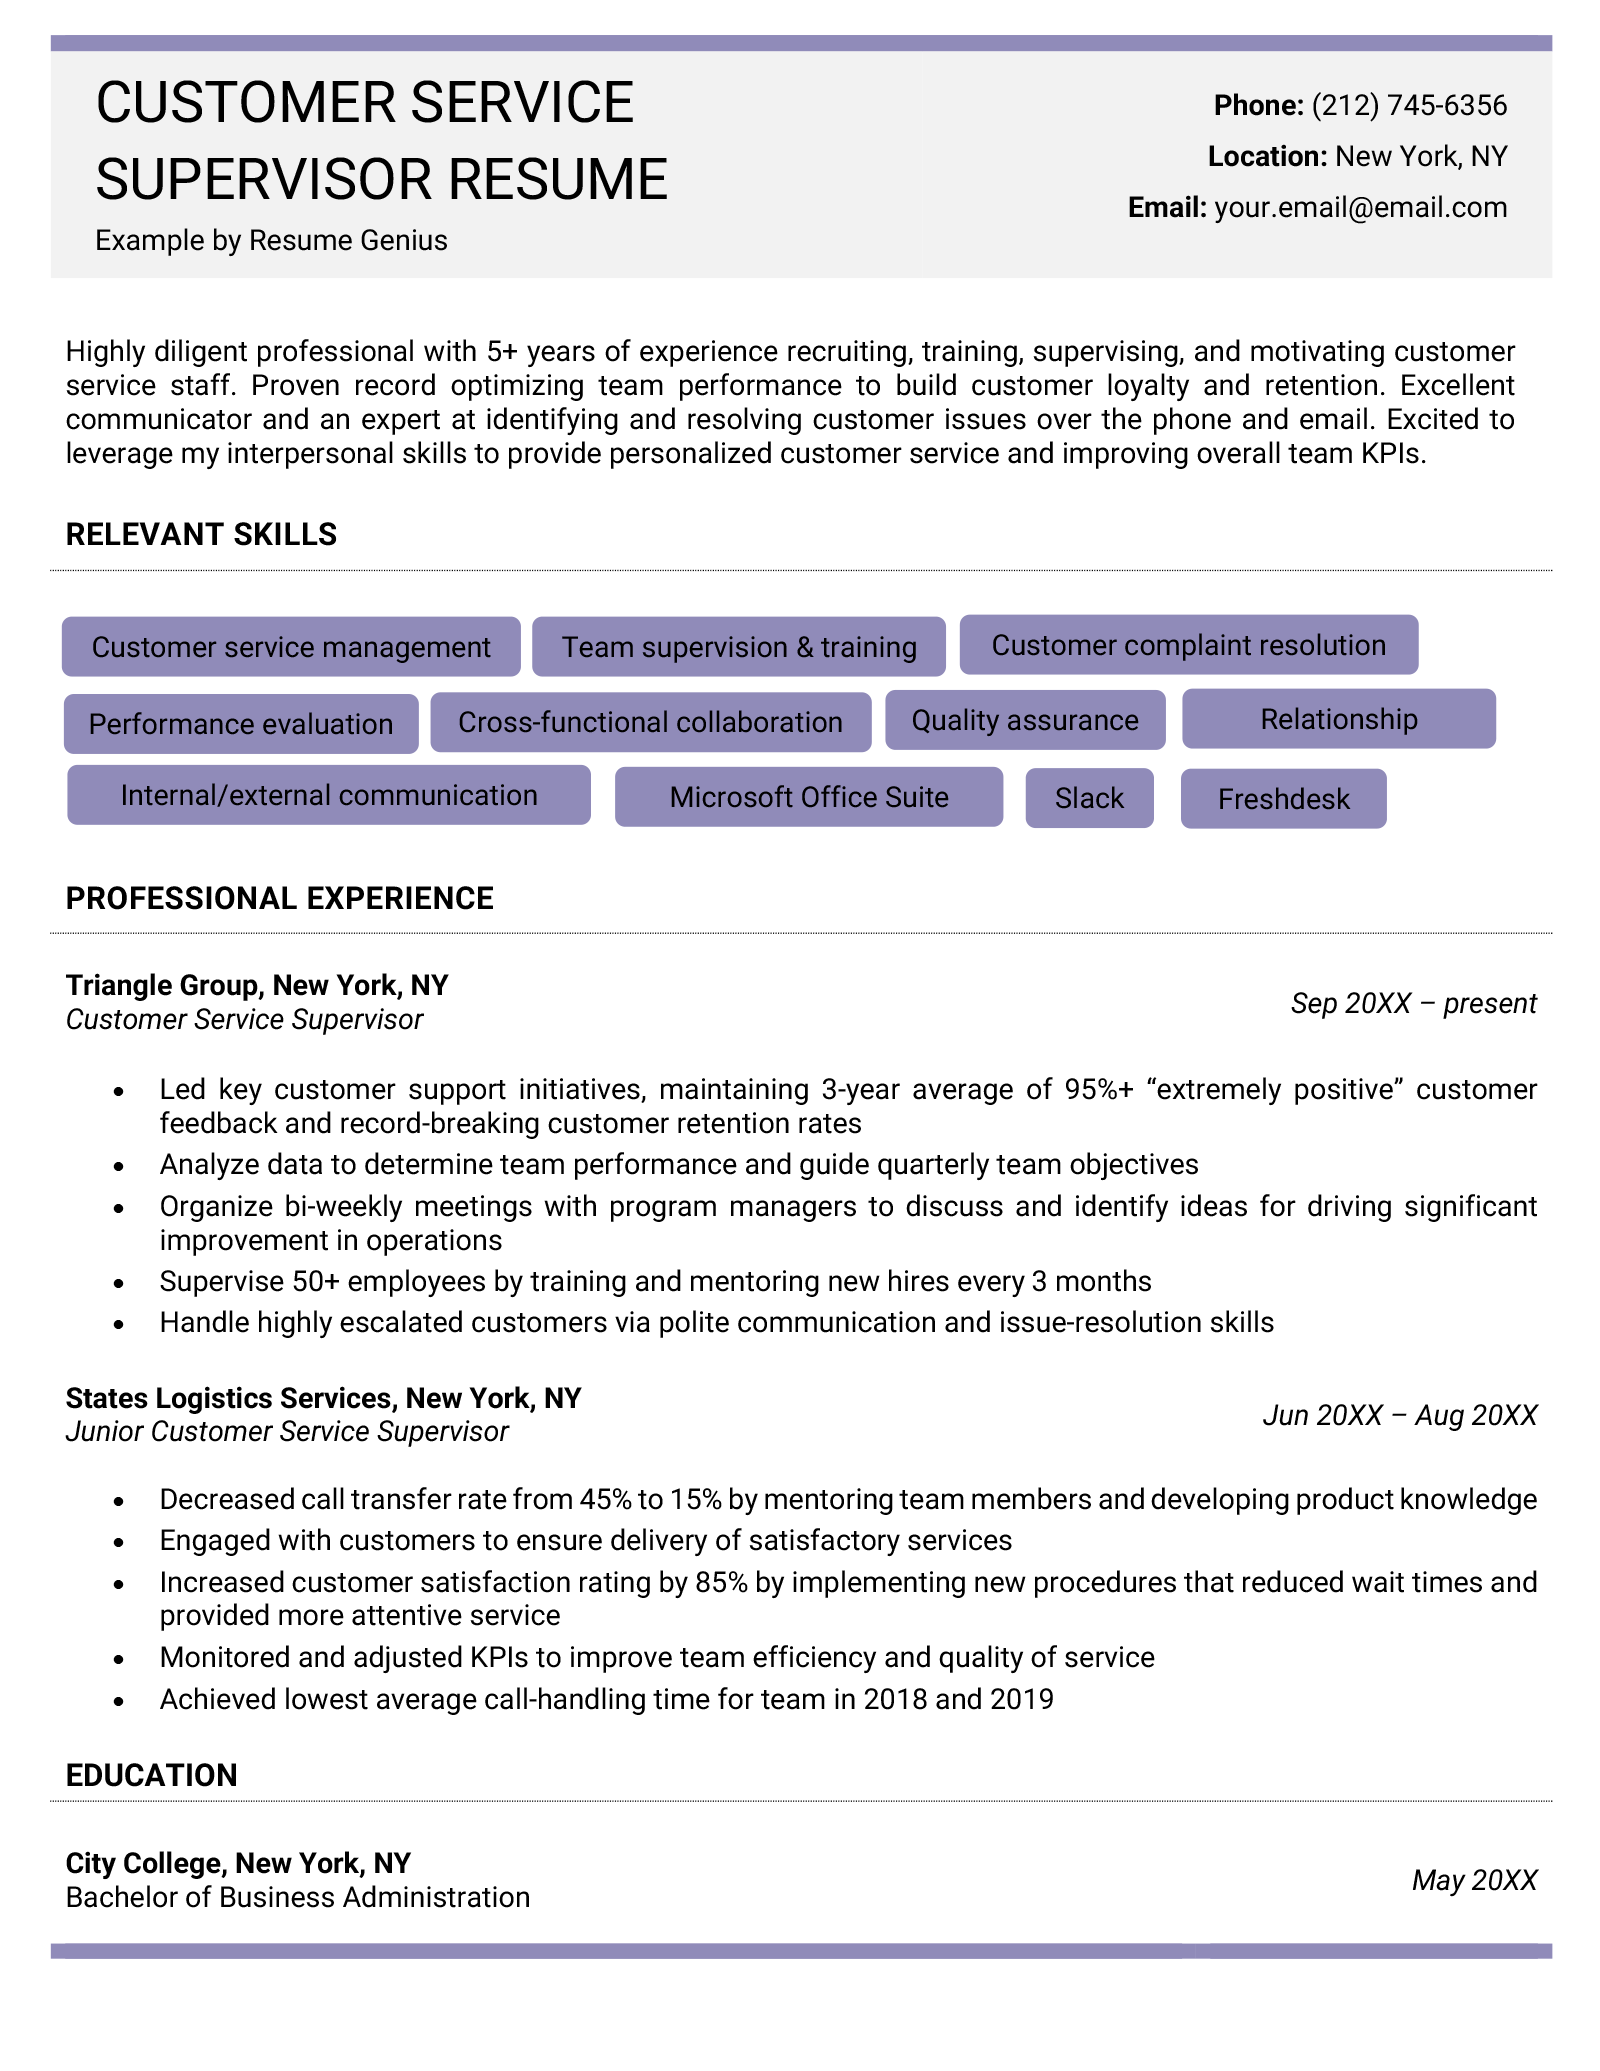 An example of a resume for a customer service supervisor. 